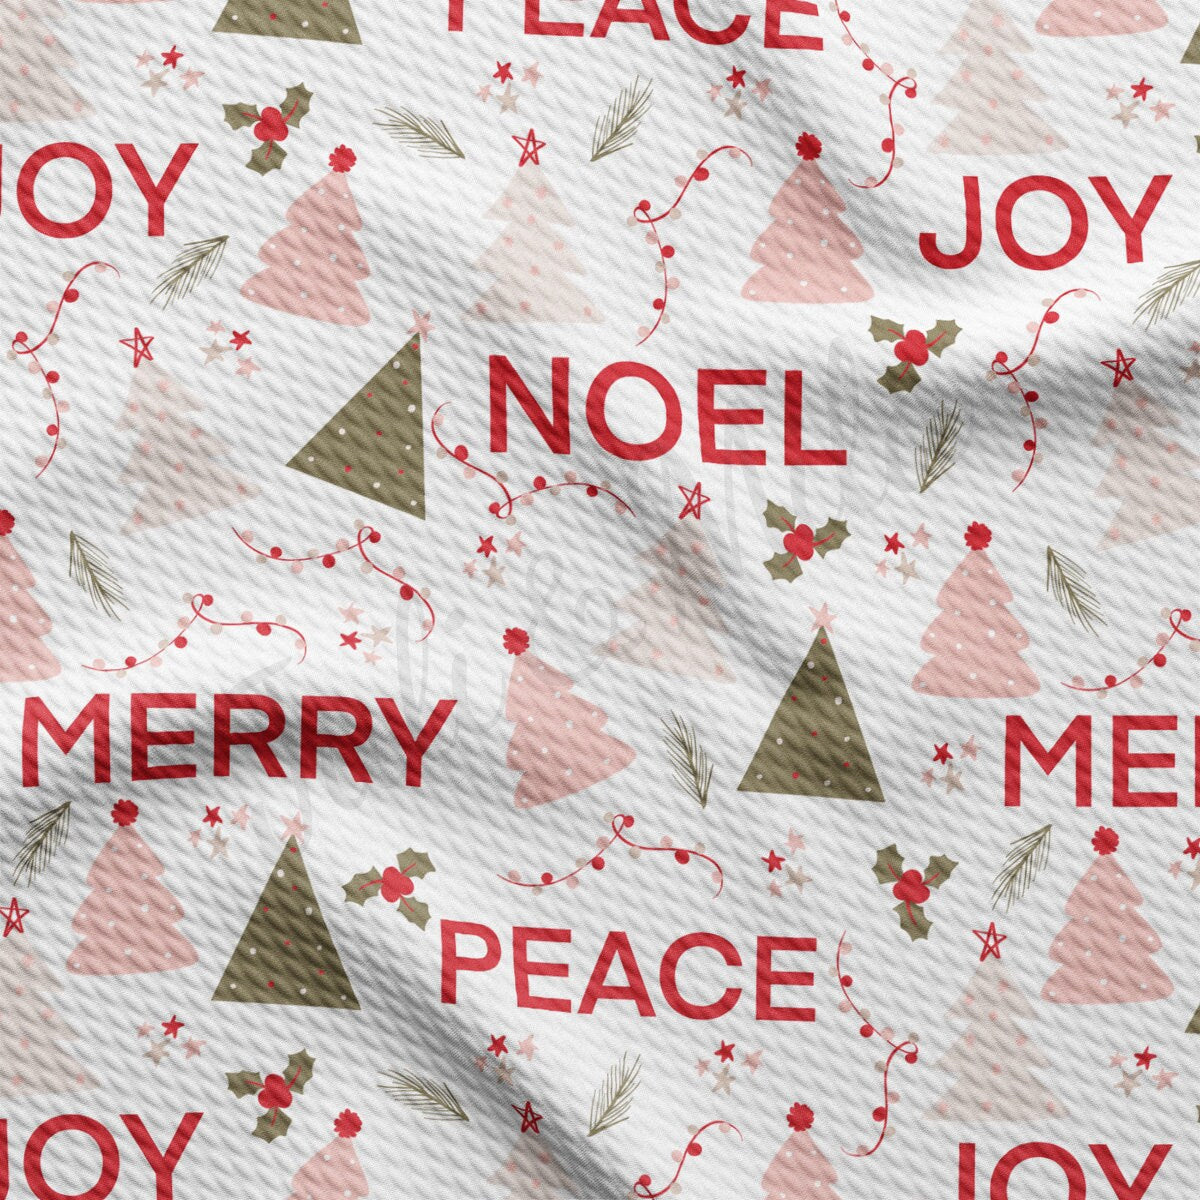 Christmas Liverpool Bullet Textured Fabric by the yard 4Way Stretch Solid Strip Thick Knit Jersey Liverpool Fabric AA2040 Christmas